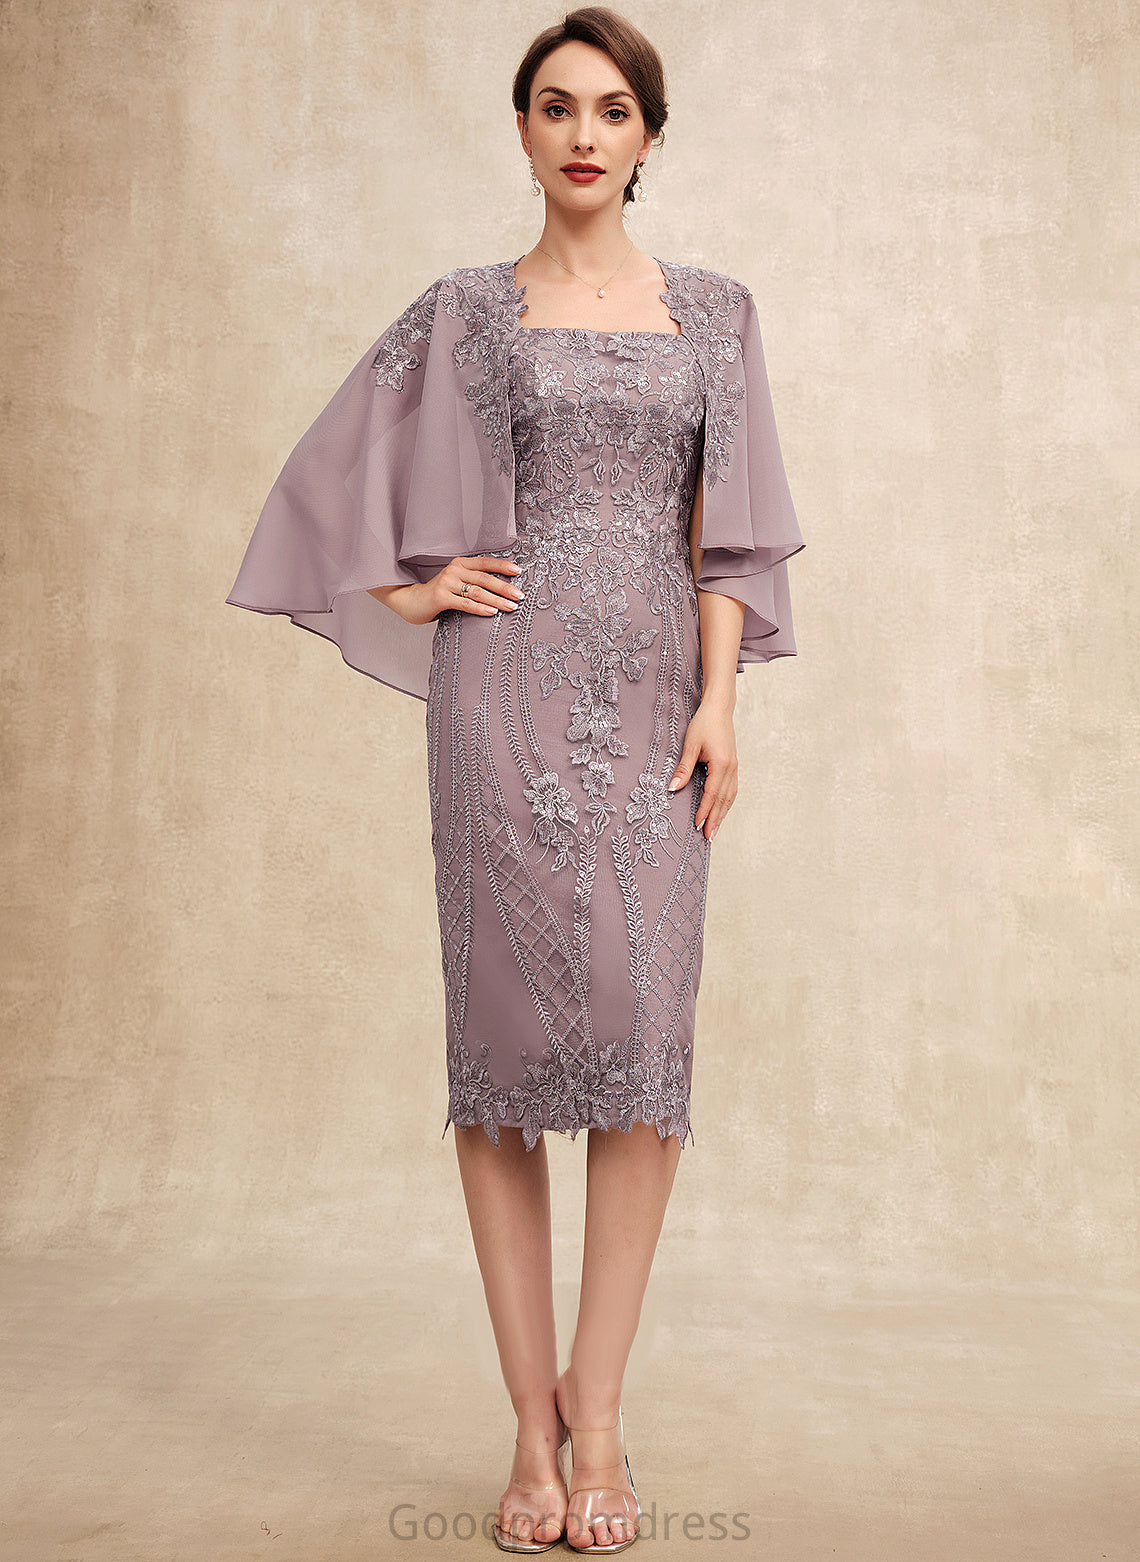 Bride Sequins Mother of the Bride Dresses Neckline With Lace Knee-Length of Mother the Square Carolyn Chiffon Dress Sheath/Column